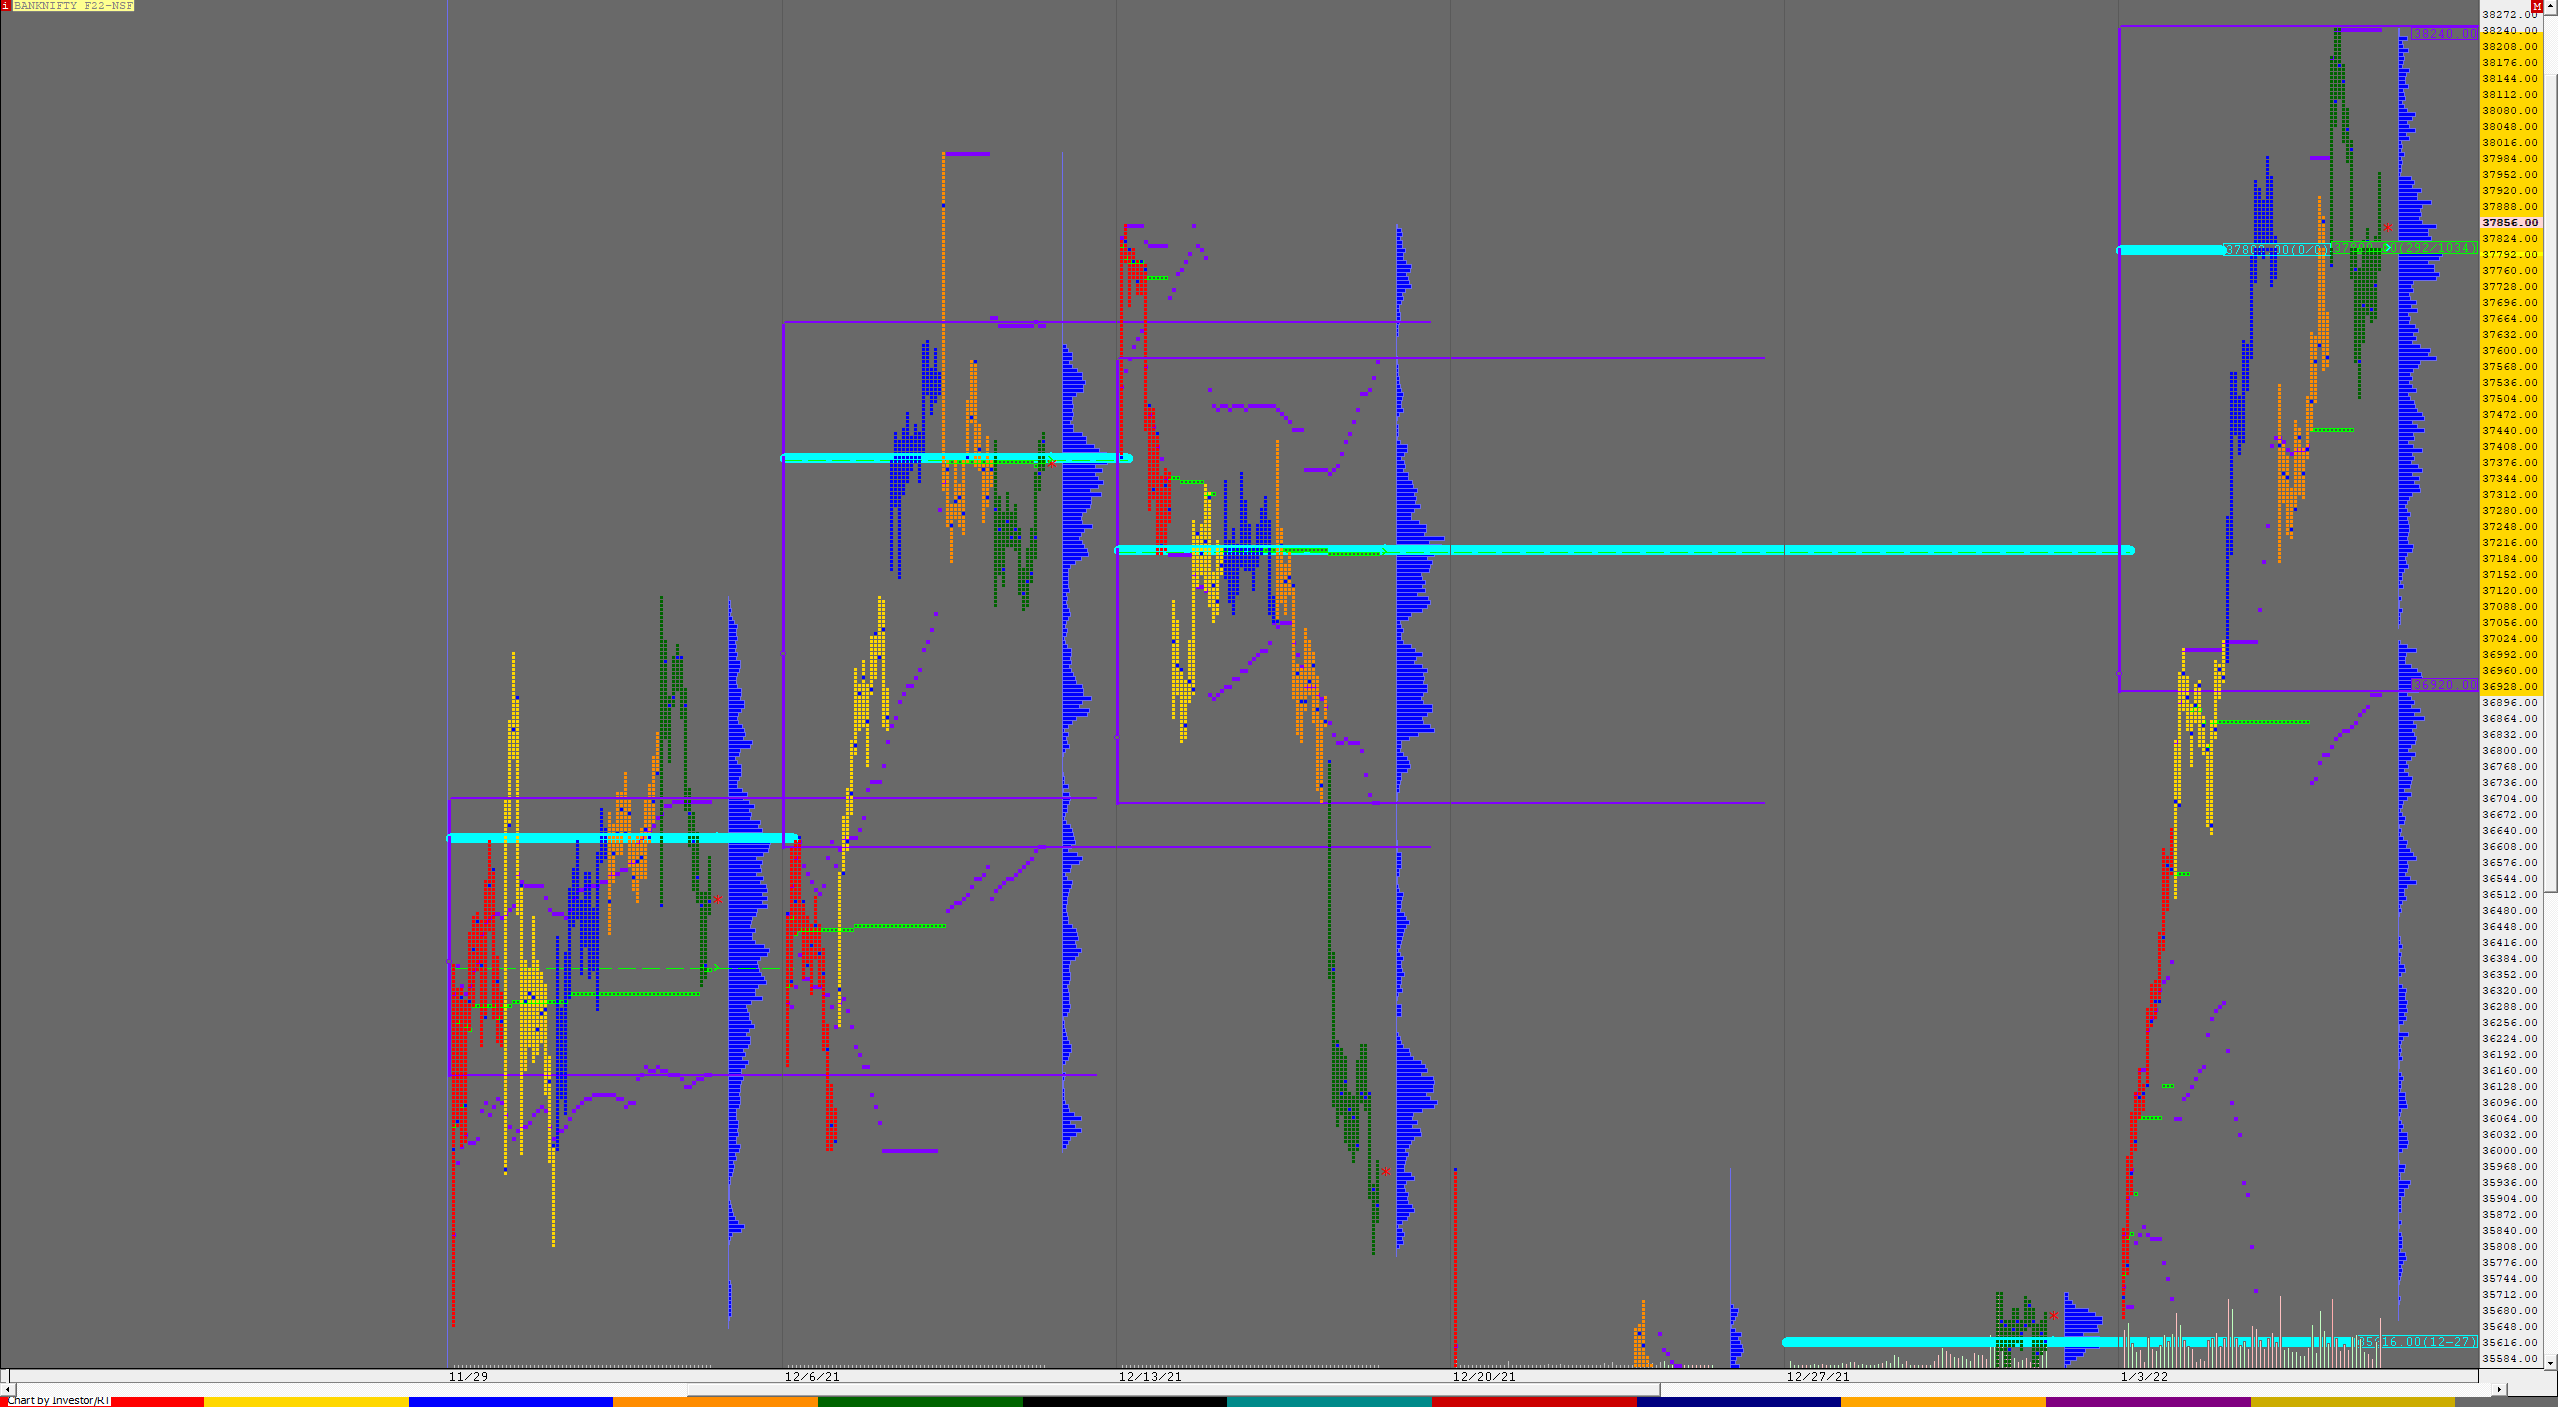 Bnf F 1 Weekly Charts (03Rd To 07Th Jan 2022) And Market Profile Analysis Banknifty Futures, Charts, Day Trading, Intraday Trading, Intraday Trading Strategies, Market Profile, Market Profile Trading Strategies, Nifty Futures, Order Flow Analysis, Support And Resistance, Technical Analysis, Trading Strategies, Volume Profile Trading